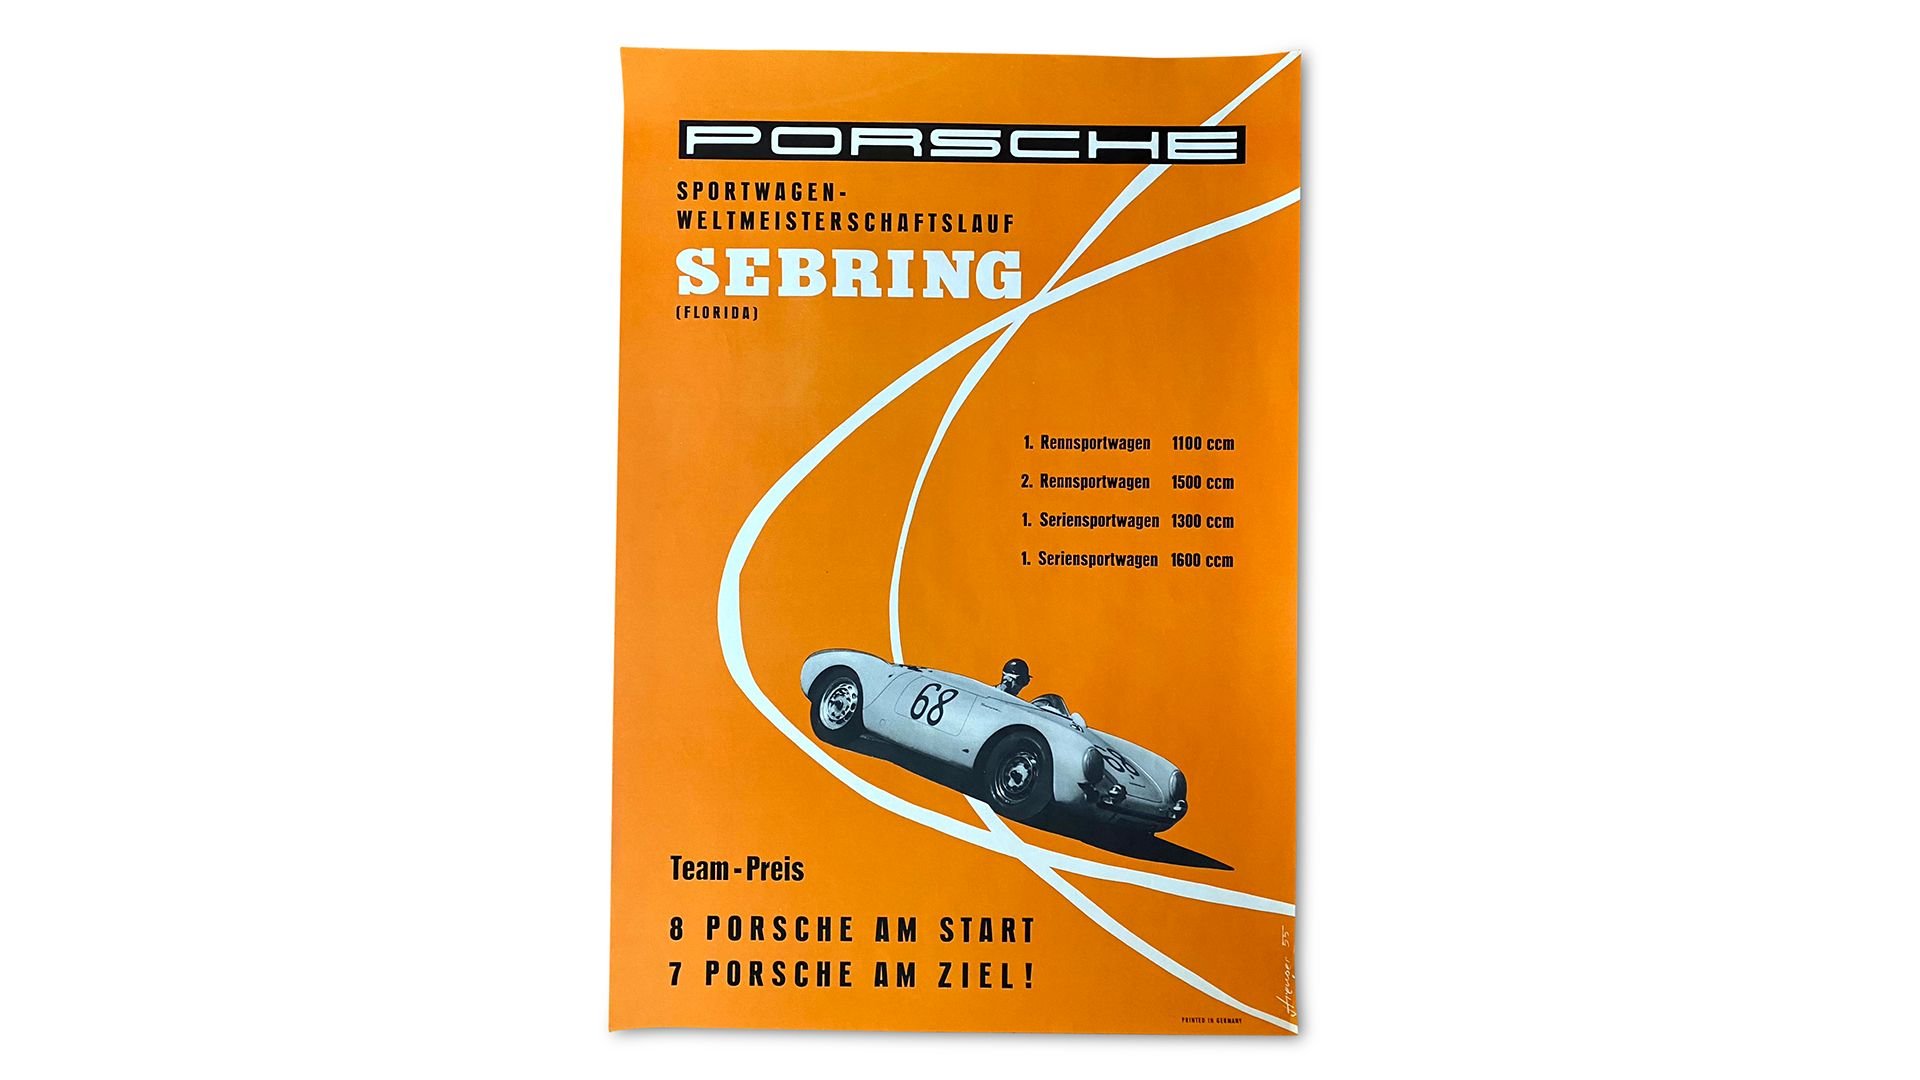 Broad Arrow Auctions | 1955 Sebring 12 Hours and 1959 Sebring 12 Hours Porsche Factory Racing Posters